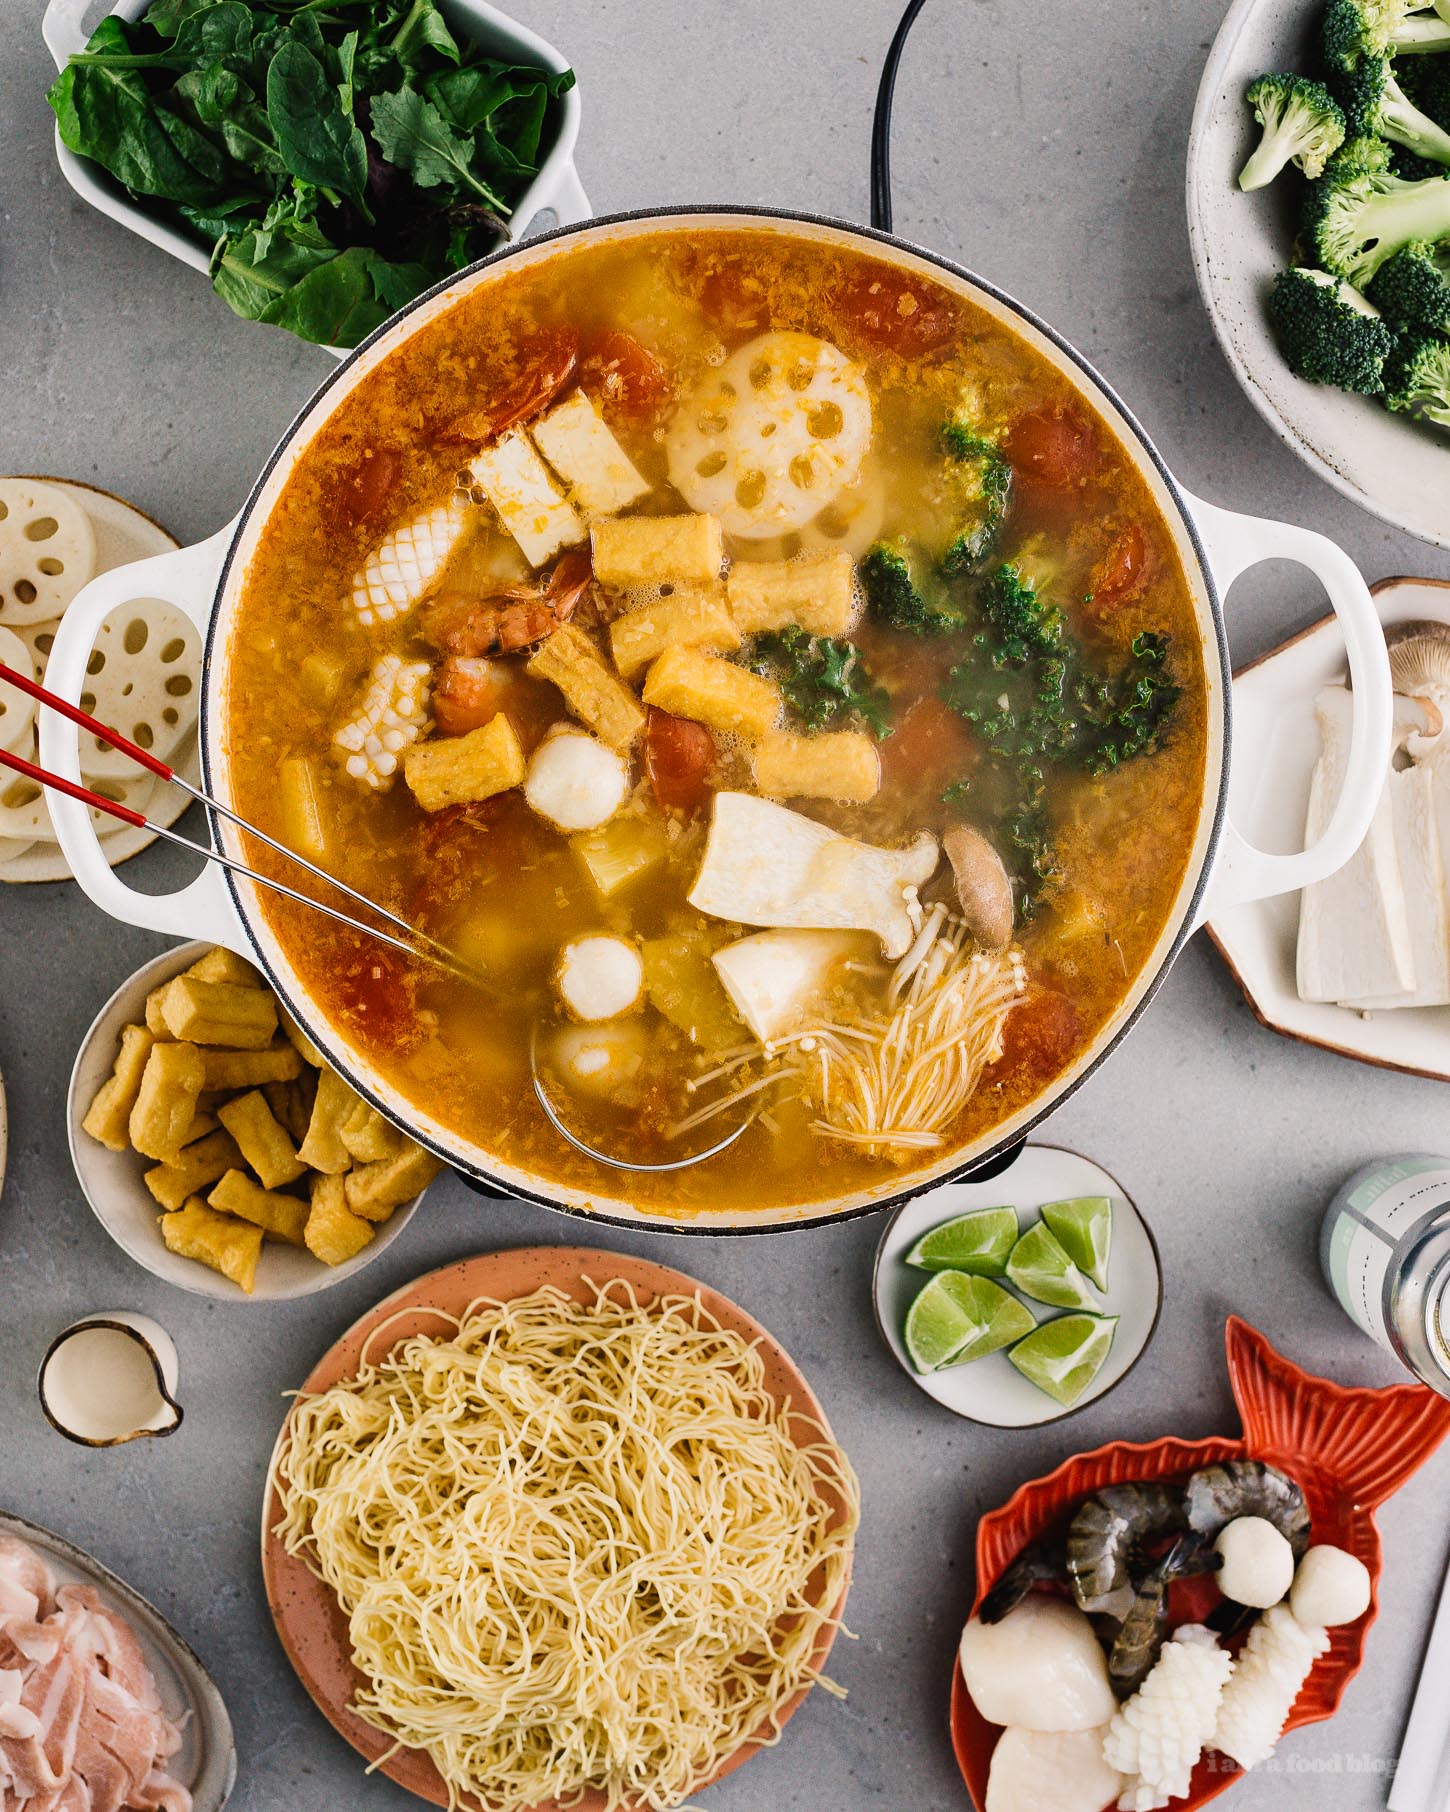 Sweet and Sour Vietnamese Hot Pot Recipe | www.iamafoodblog.com